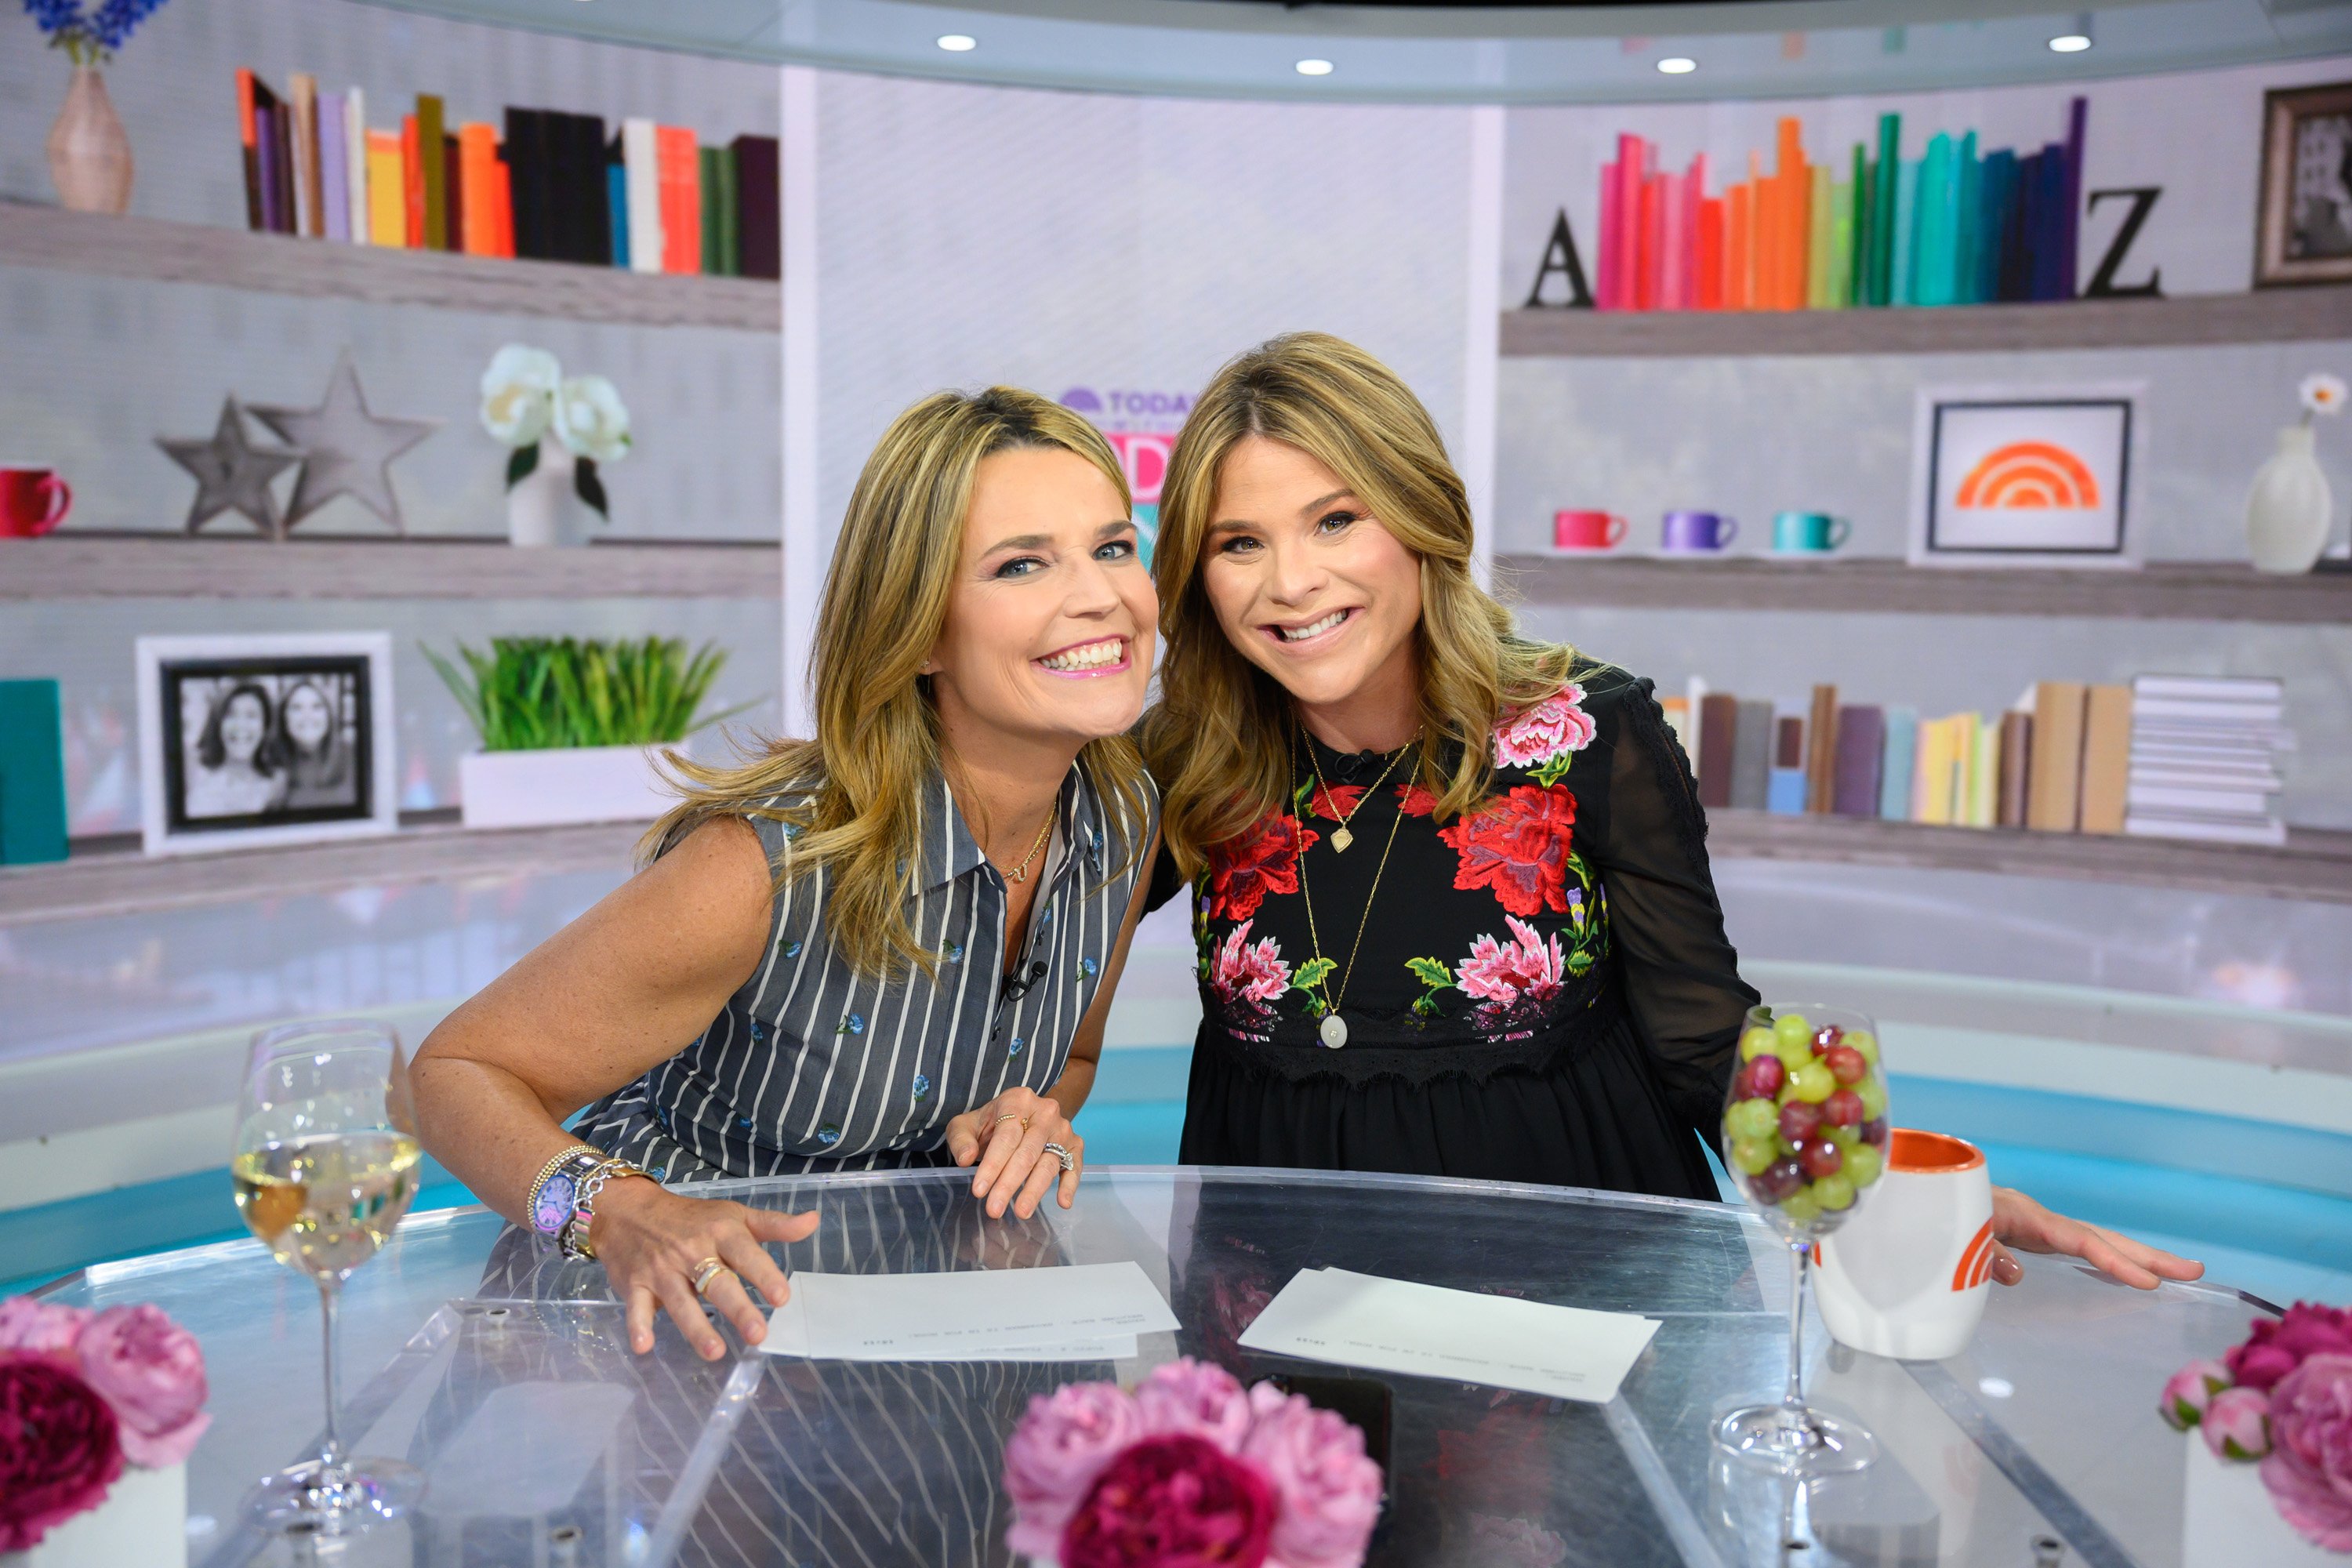 Lawyer and TV host Savannah Guthrie and co-host Jenna Bush Hager in "Today" set. | Photo: Getty Images